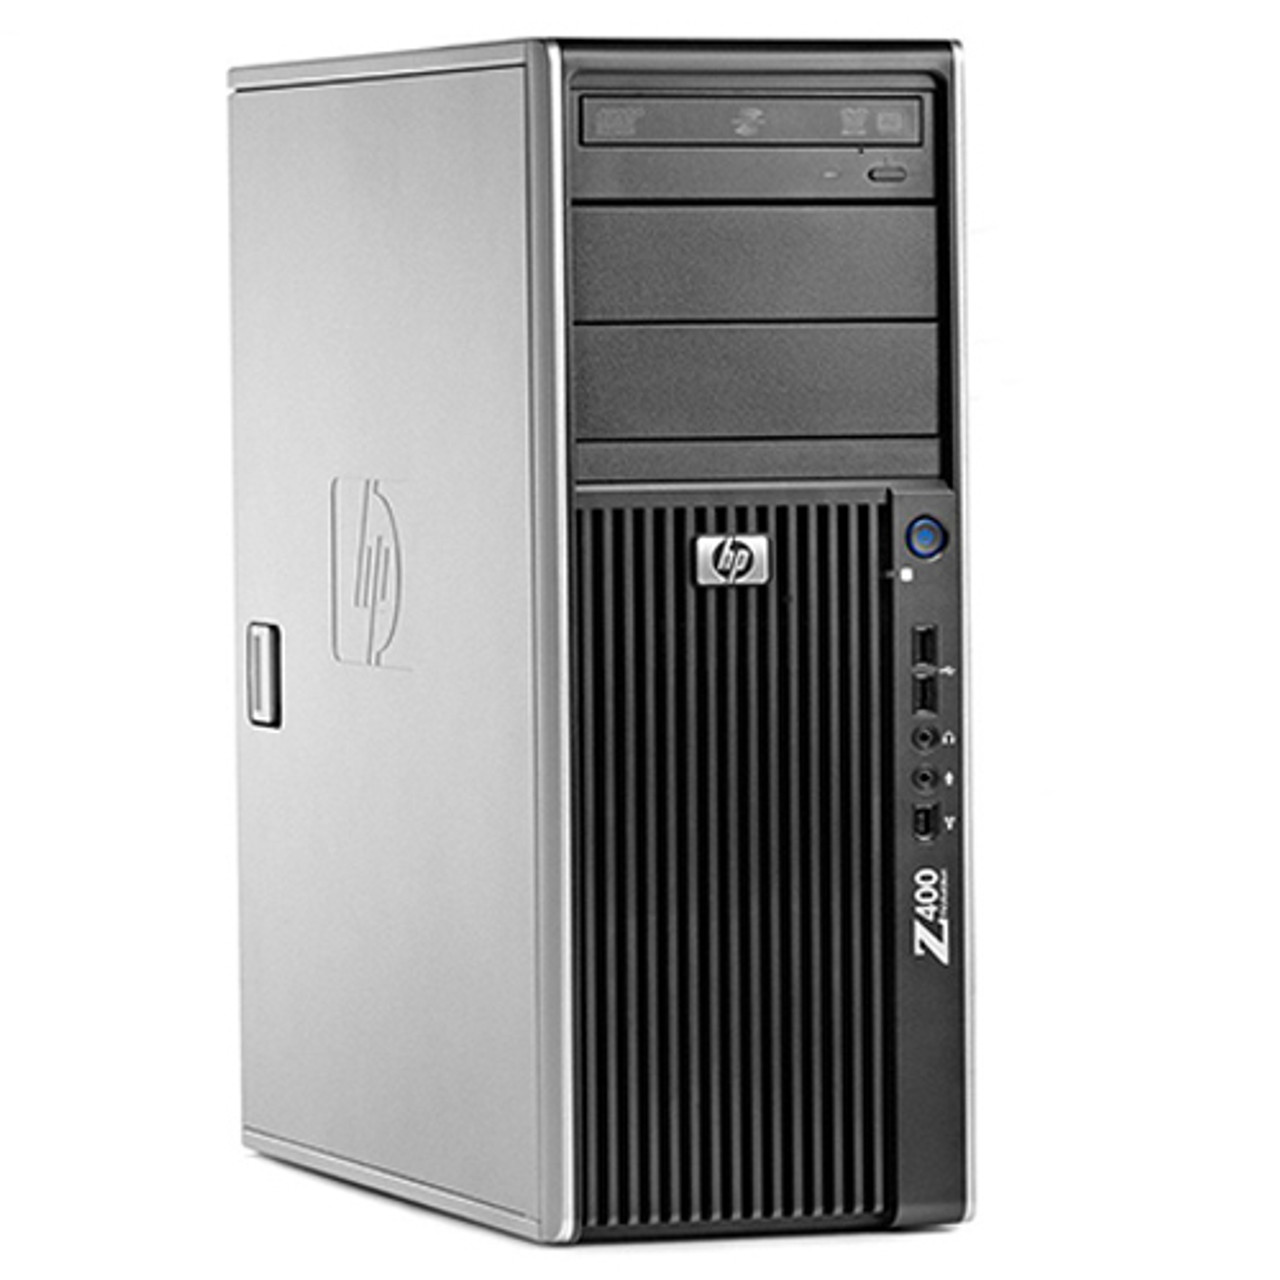 HP Z400 Workstation Desktop Computer PC Intel Xeon 2.53GHZ 8GB 1TB Windows  10 Pro with Dedicated Graphics and WIFI